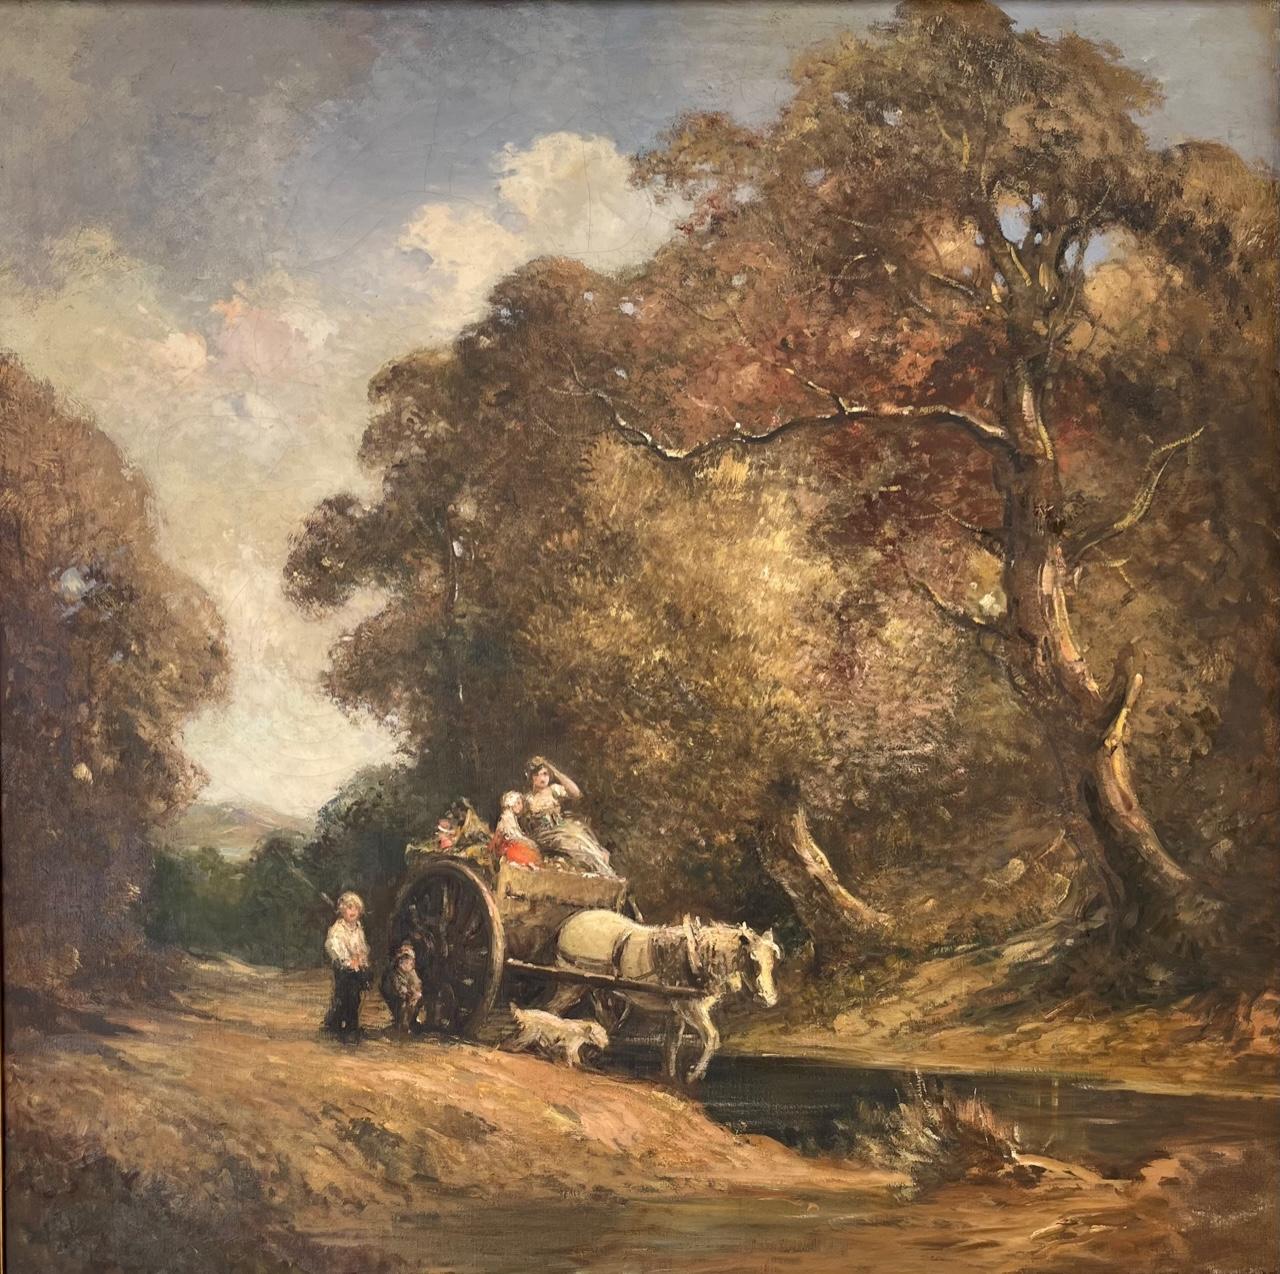 English Genre Romantic landscape oil painting in Newcomb-Macklin Frame.

This beautiful large painting, ca.1900, defines Great British landscape art. It depicts ordinary activities of daily life against a backdrop of natural scenery with rural